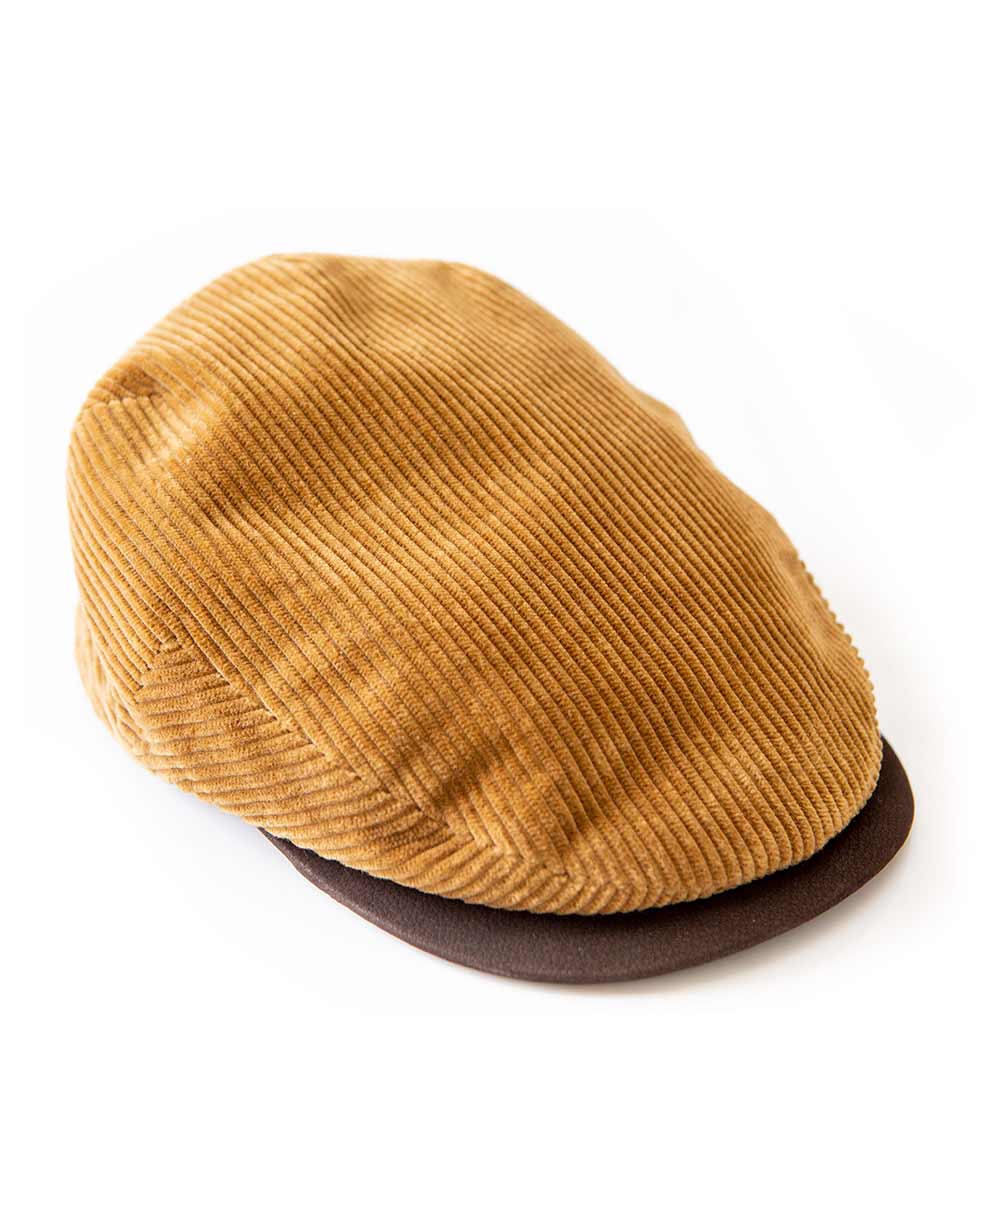 Corduroy Flat Cap with Leather Strap Tan